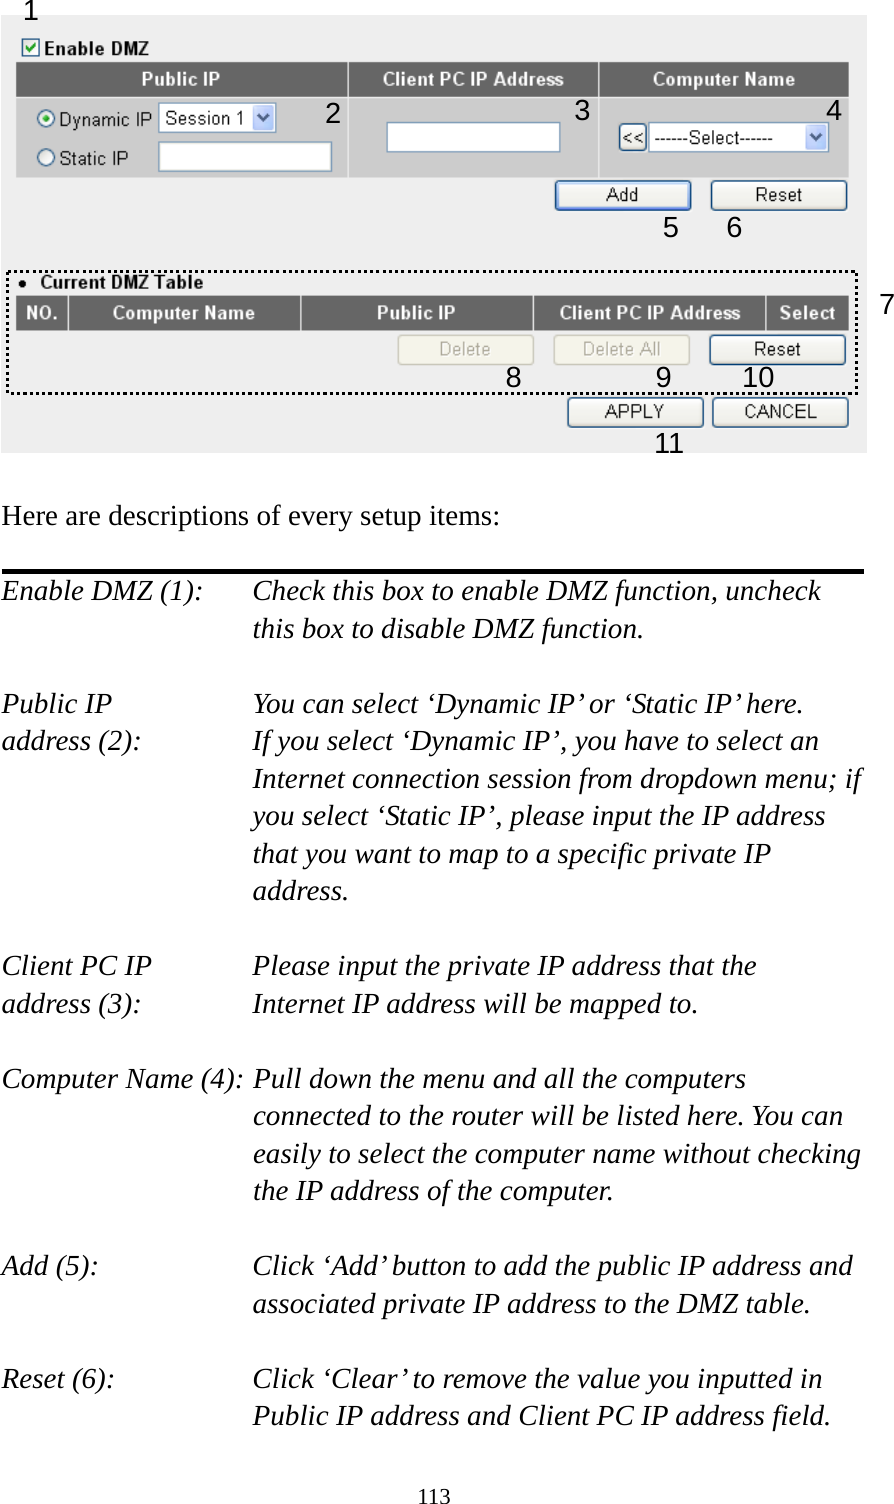 113   Here are descriptions of every setup items:  Enable DMZ (1):    Check this box to enable DMZ function, uncheck this box to disable DMZ function.  Public IP        You can select ‘Dynamic IP’ or ‘Static IP’ here. address (2):    If you select ‘Dynamic IP’, you have to select an Internet connection session from dropdown menu; if you select ‘Static IP’, please input the IP address that you want to map to a specific private IP address.  Client PC IP      Please input the private IP address that the address (3):      Internet IP address will be mapped to.  Computer Name (4): Pull down the menu and all the computers connected to the router will be listed here. You can easily to select the computer name without checking the IP address of the computer.  Add (5):    Click ‘Add’ button to add the public IP address and associated private IP address to the DMZ table.  Reset (6):    Click ‘Clear’ to remove the value you inputted in Public IP address and Client PC IP address field. 1 2456 78 9 10 113